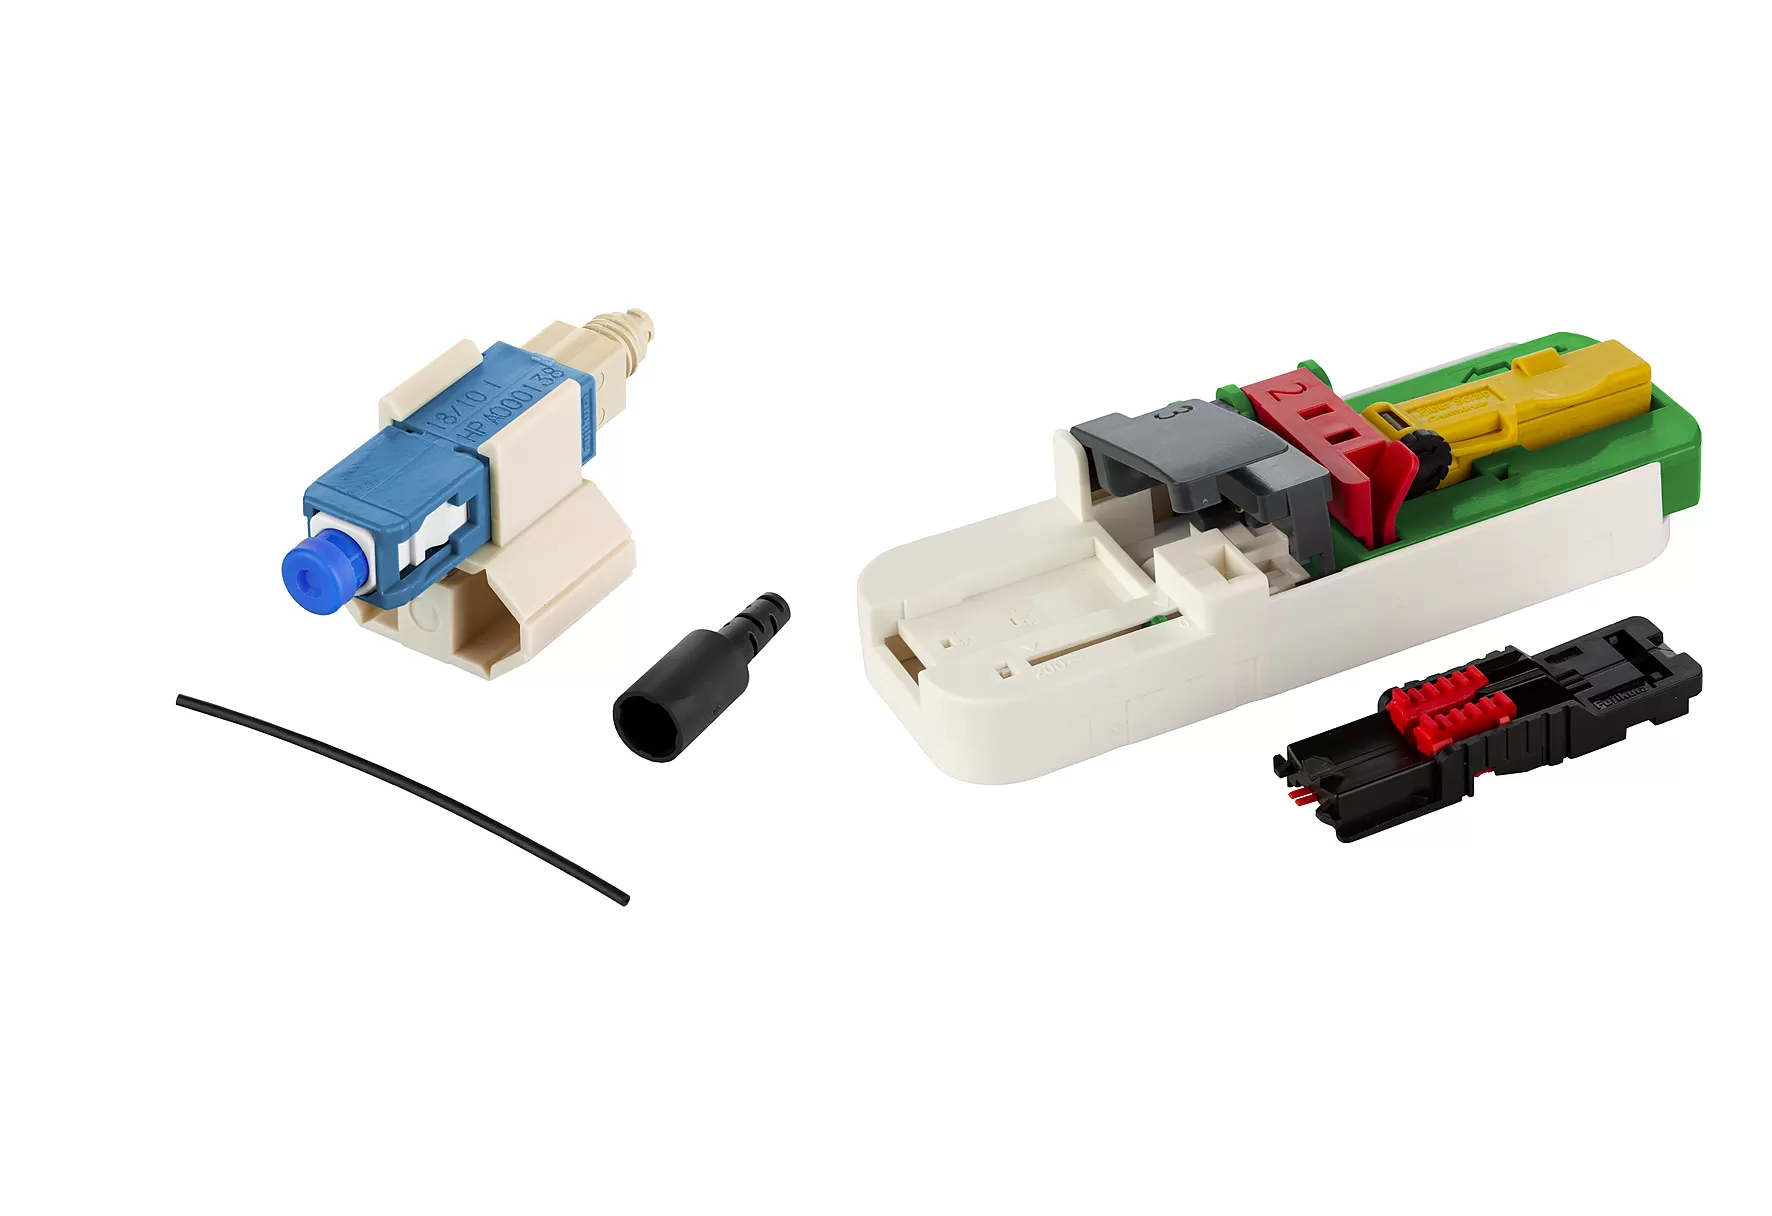 Metz Connect OpDAT FAST Hybrid Steckerbausatz SC UPC OS2 100 Stück für Adern Ø 0,25 + 0,9 mm inkl. Cleaver-Set und Faser-Guide 1509QAEO010C-E